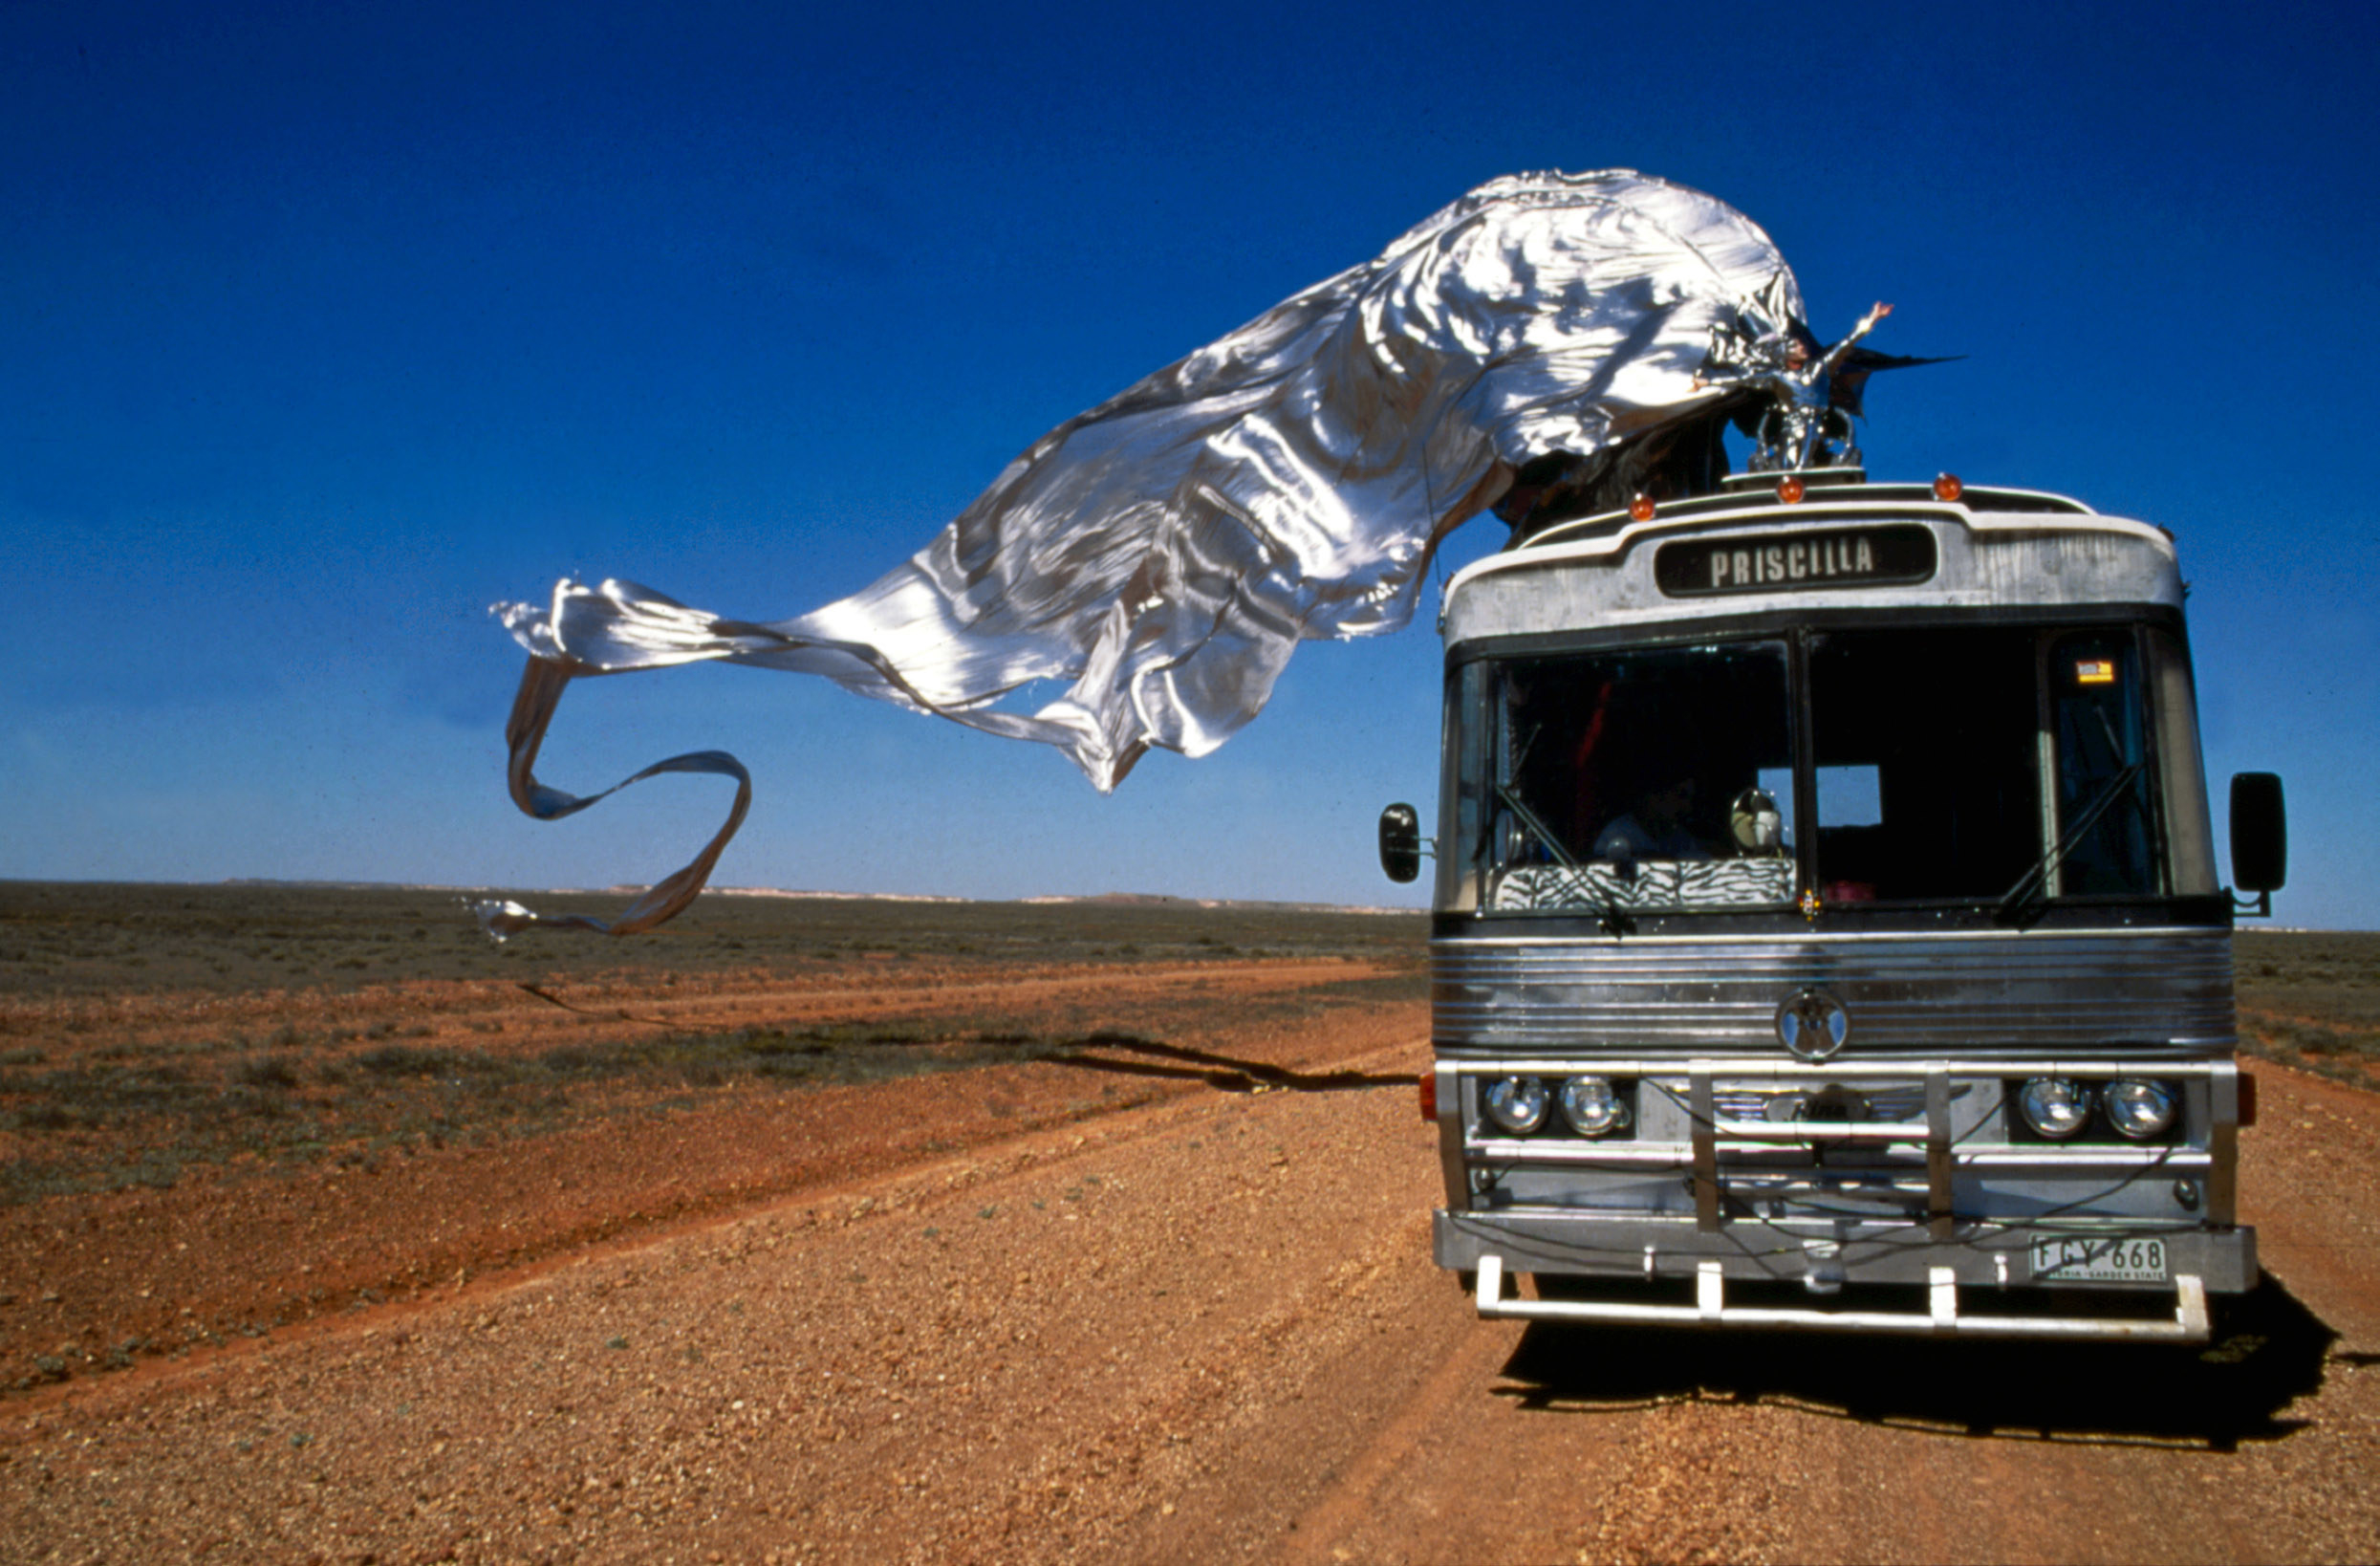 The silver costume with its huge cape on top of the bus, Priscilla